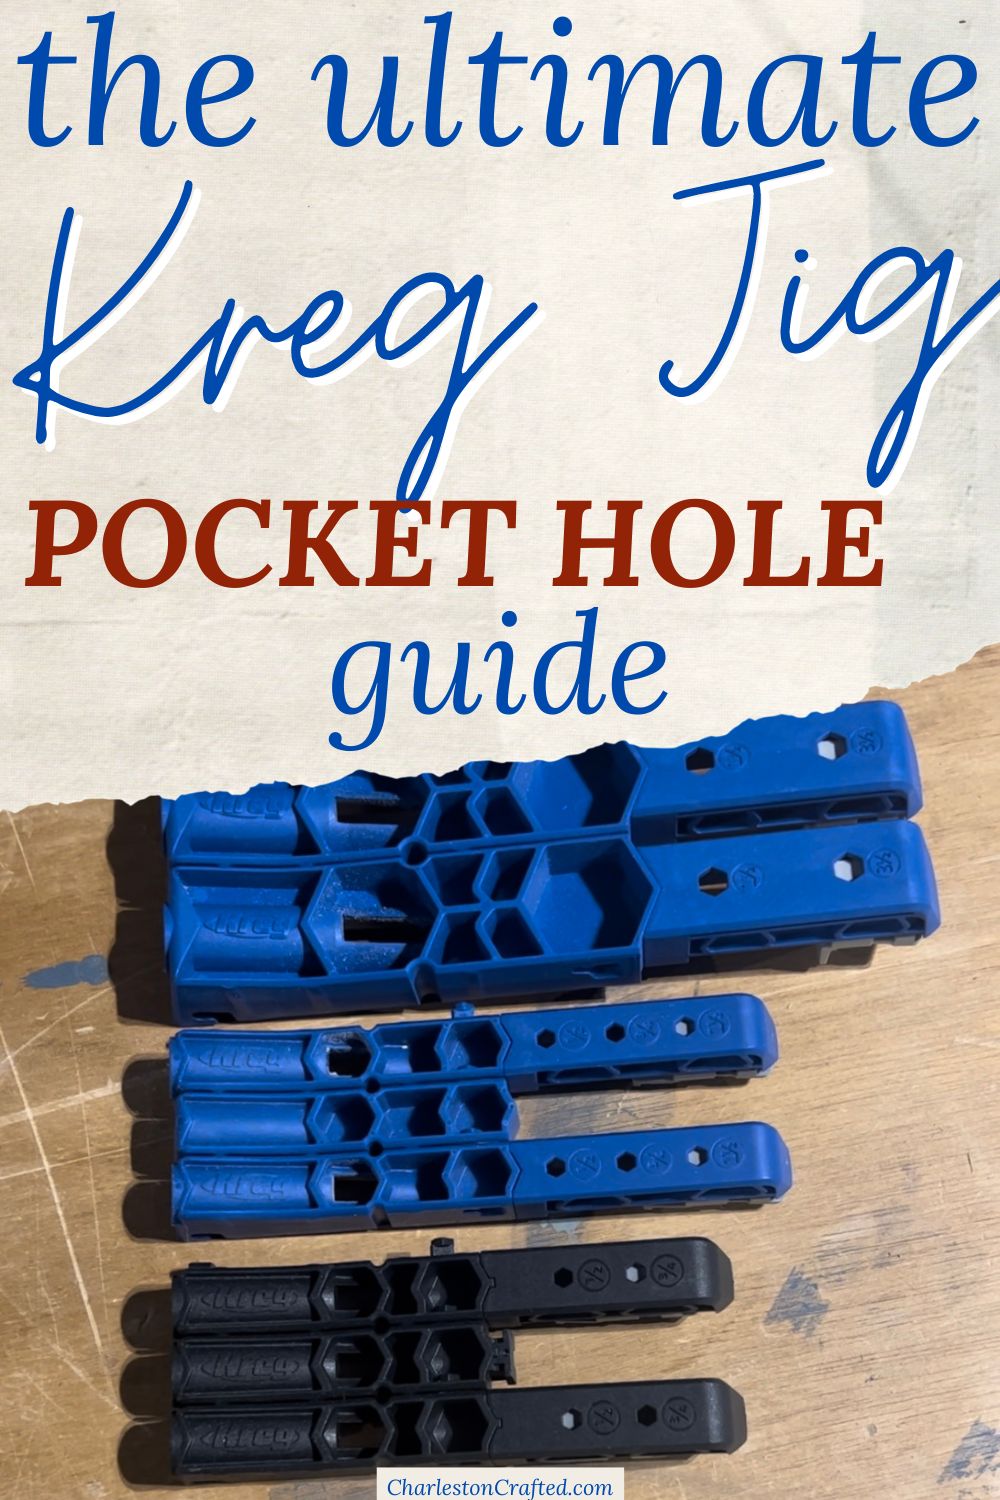 Kreg Jig 101: Everything you need to know